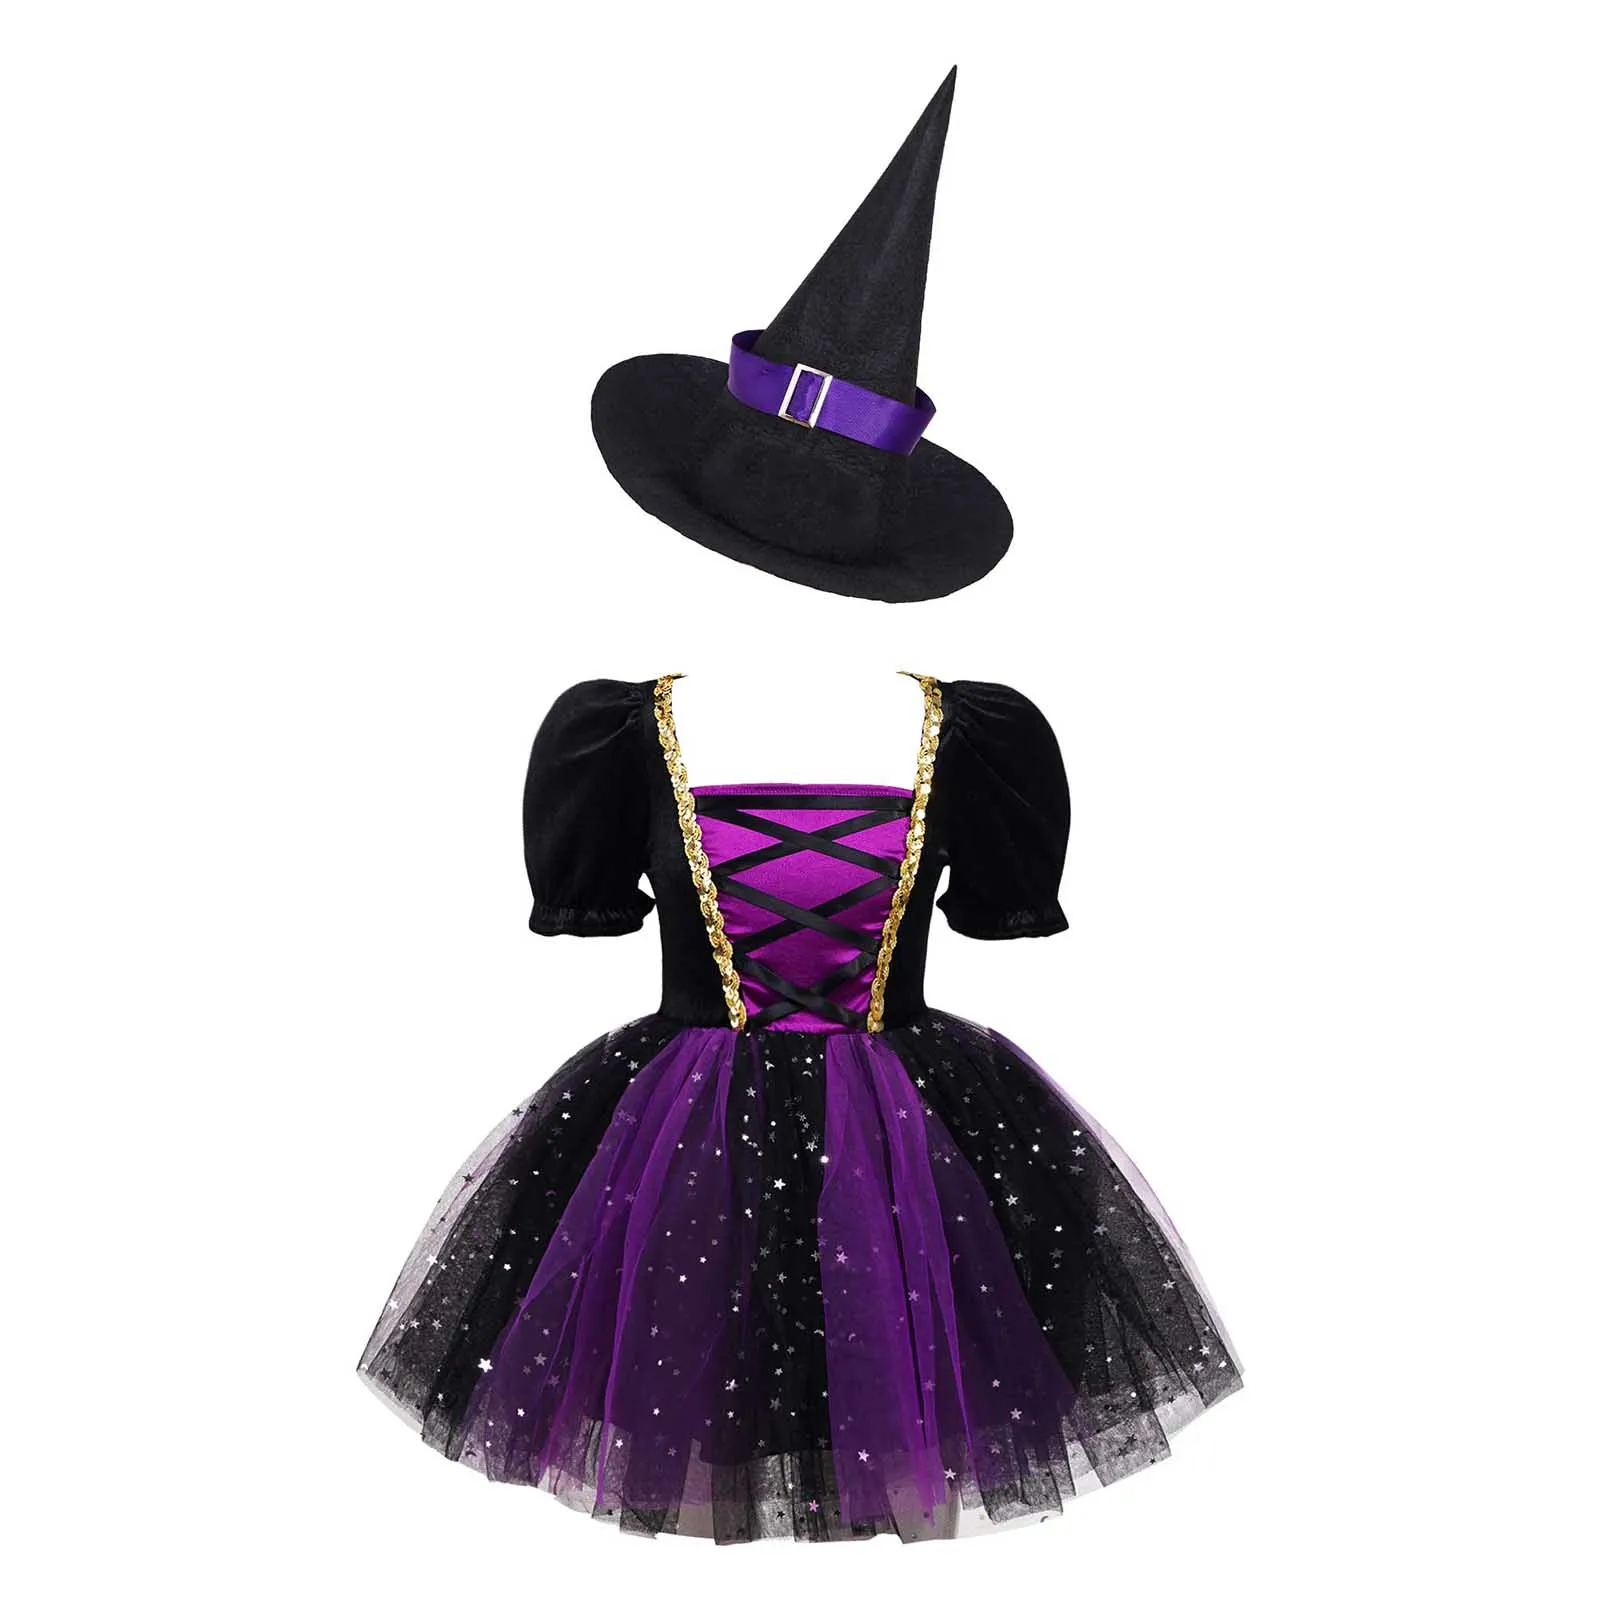 

Kids Girls Witch Costume Halloween Cosplay Dress Glittery Mesh Tutu Dress with Pointed Hat for Carnival Party Dress Up Clothes